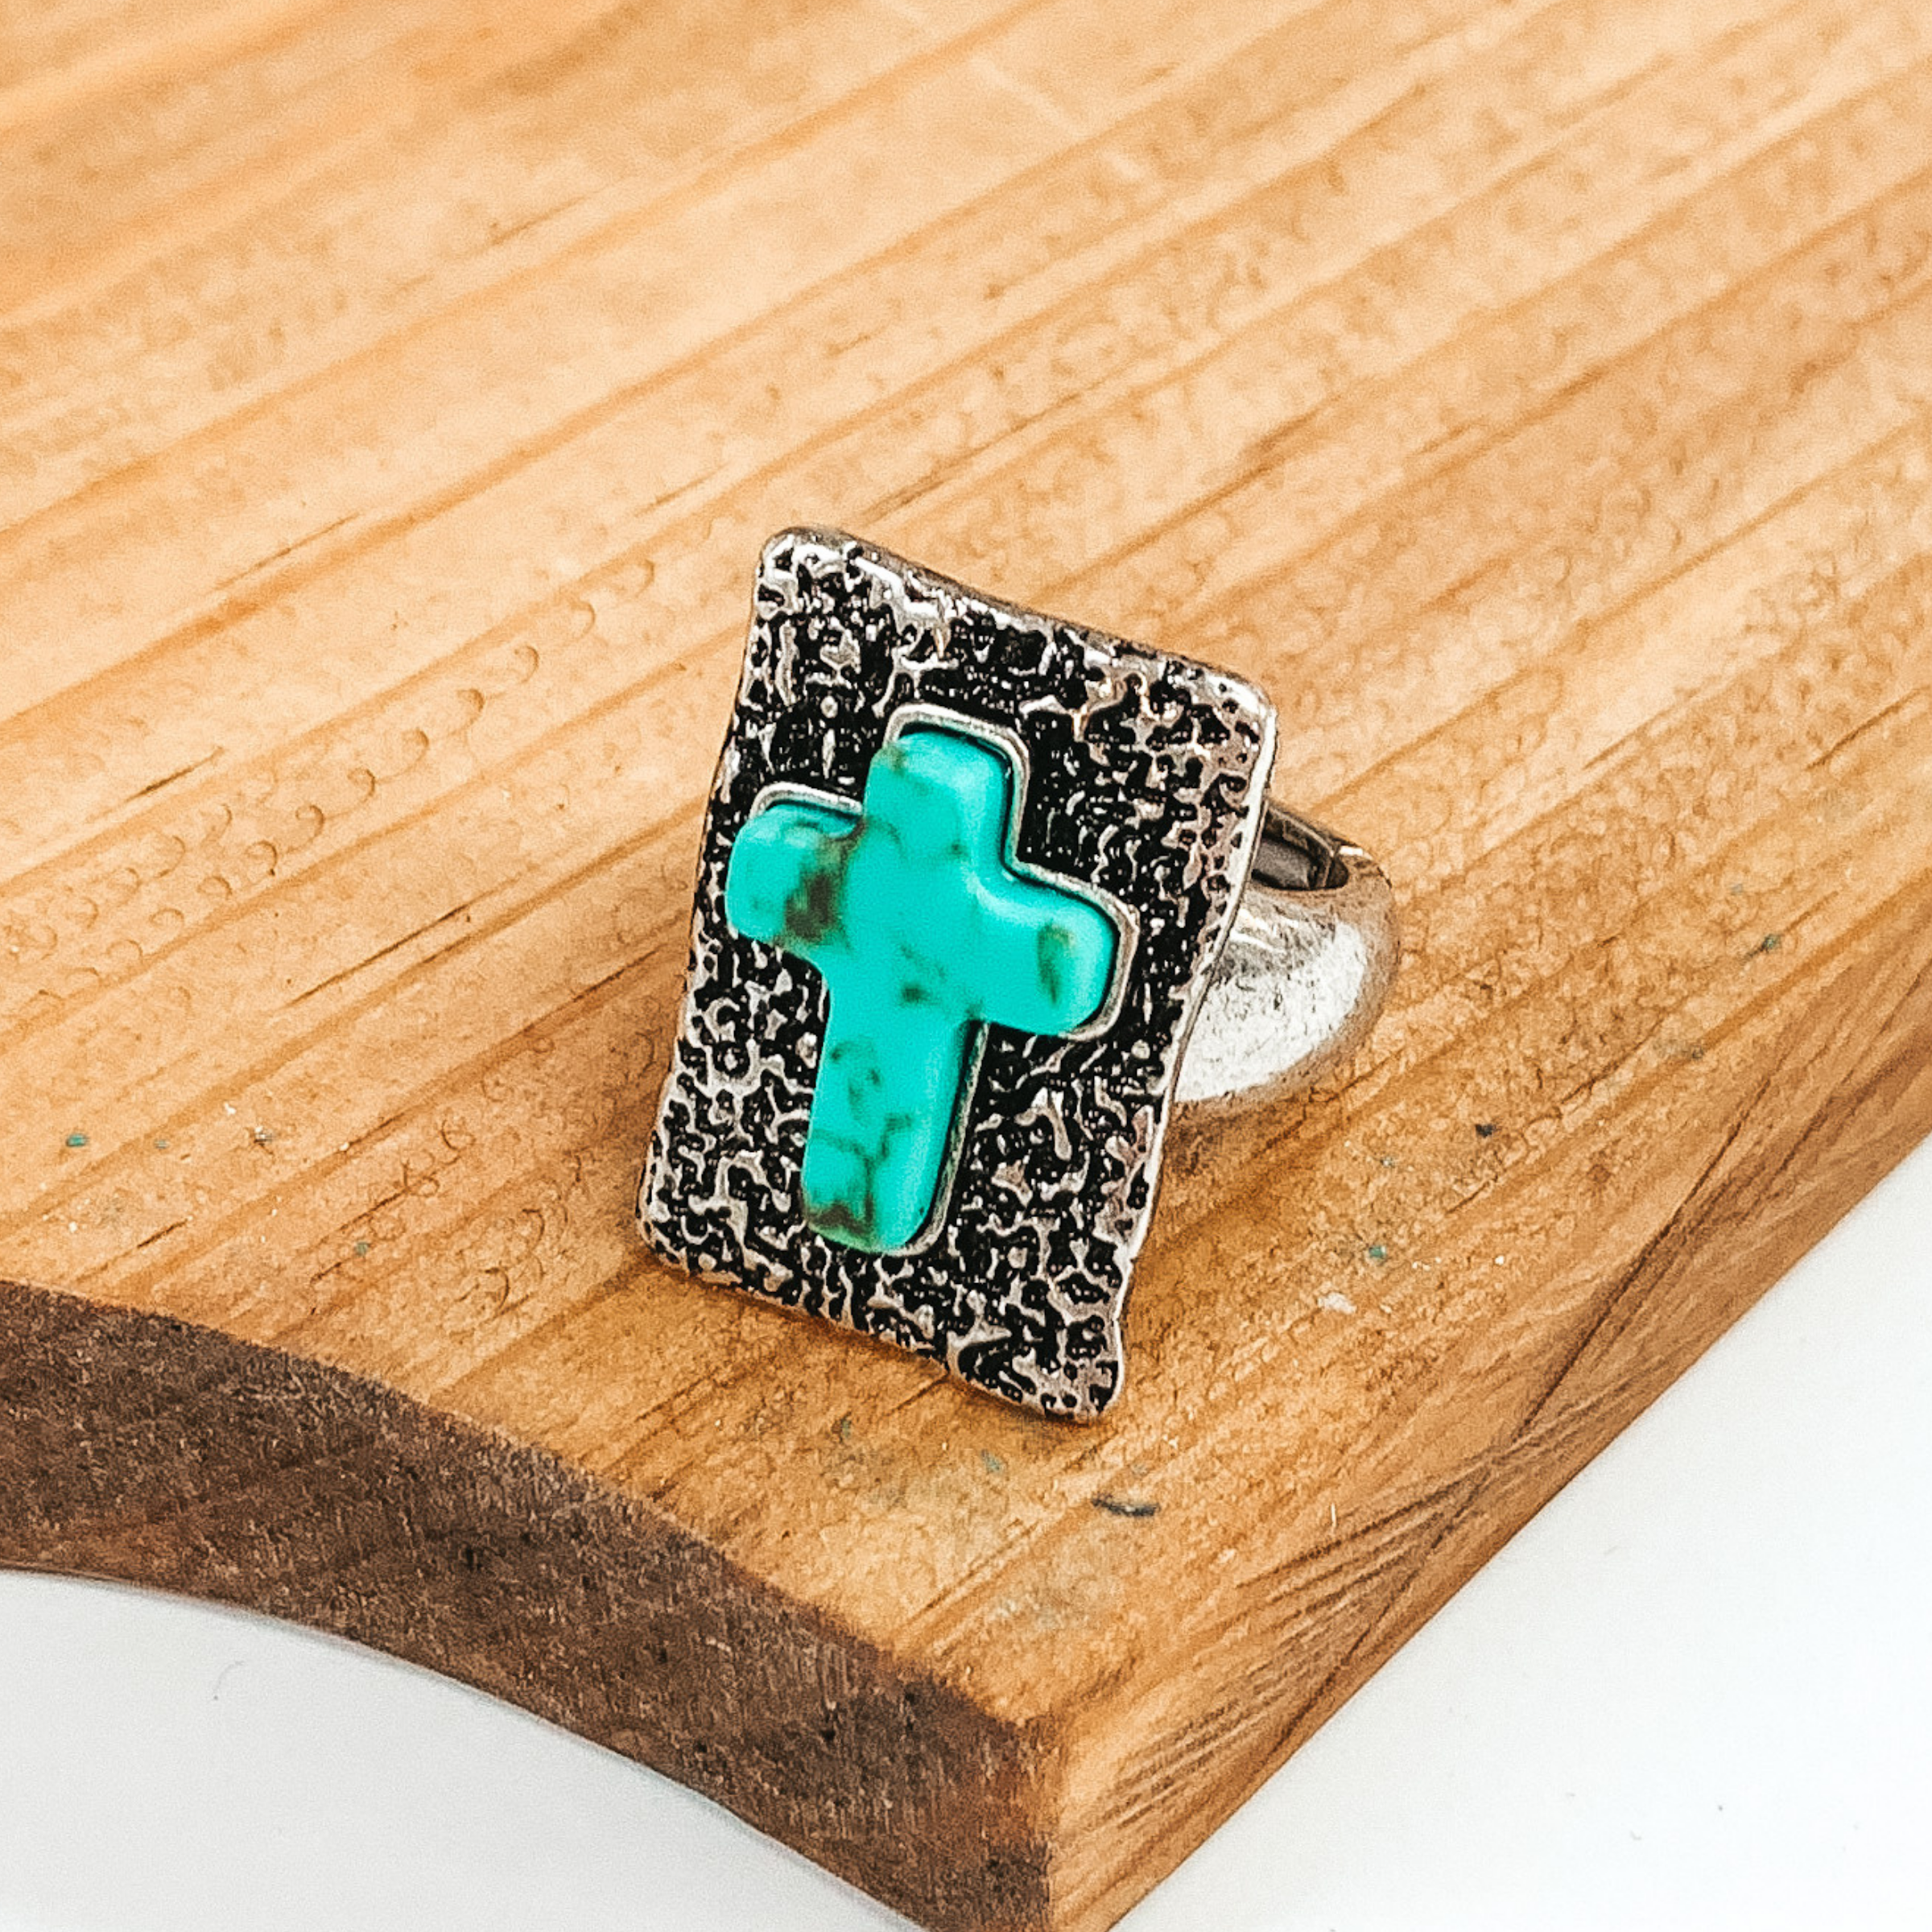 Silver stretchy ring that has a silver rectangle pendant with engraving detailing. In the center of the pendant, there is a turquoise cross stone. This ring is pictured laying on a brown block on a white background.